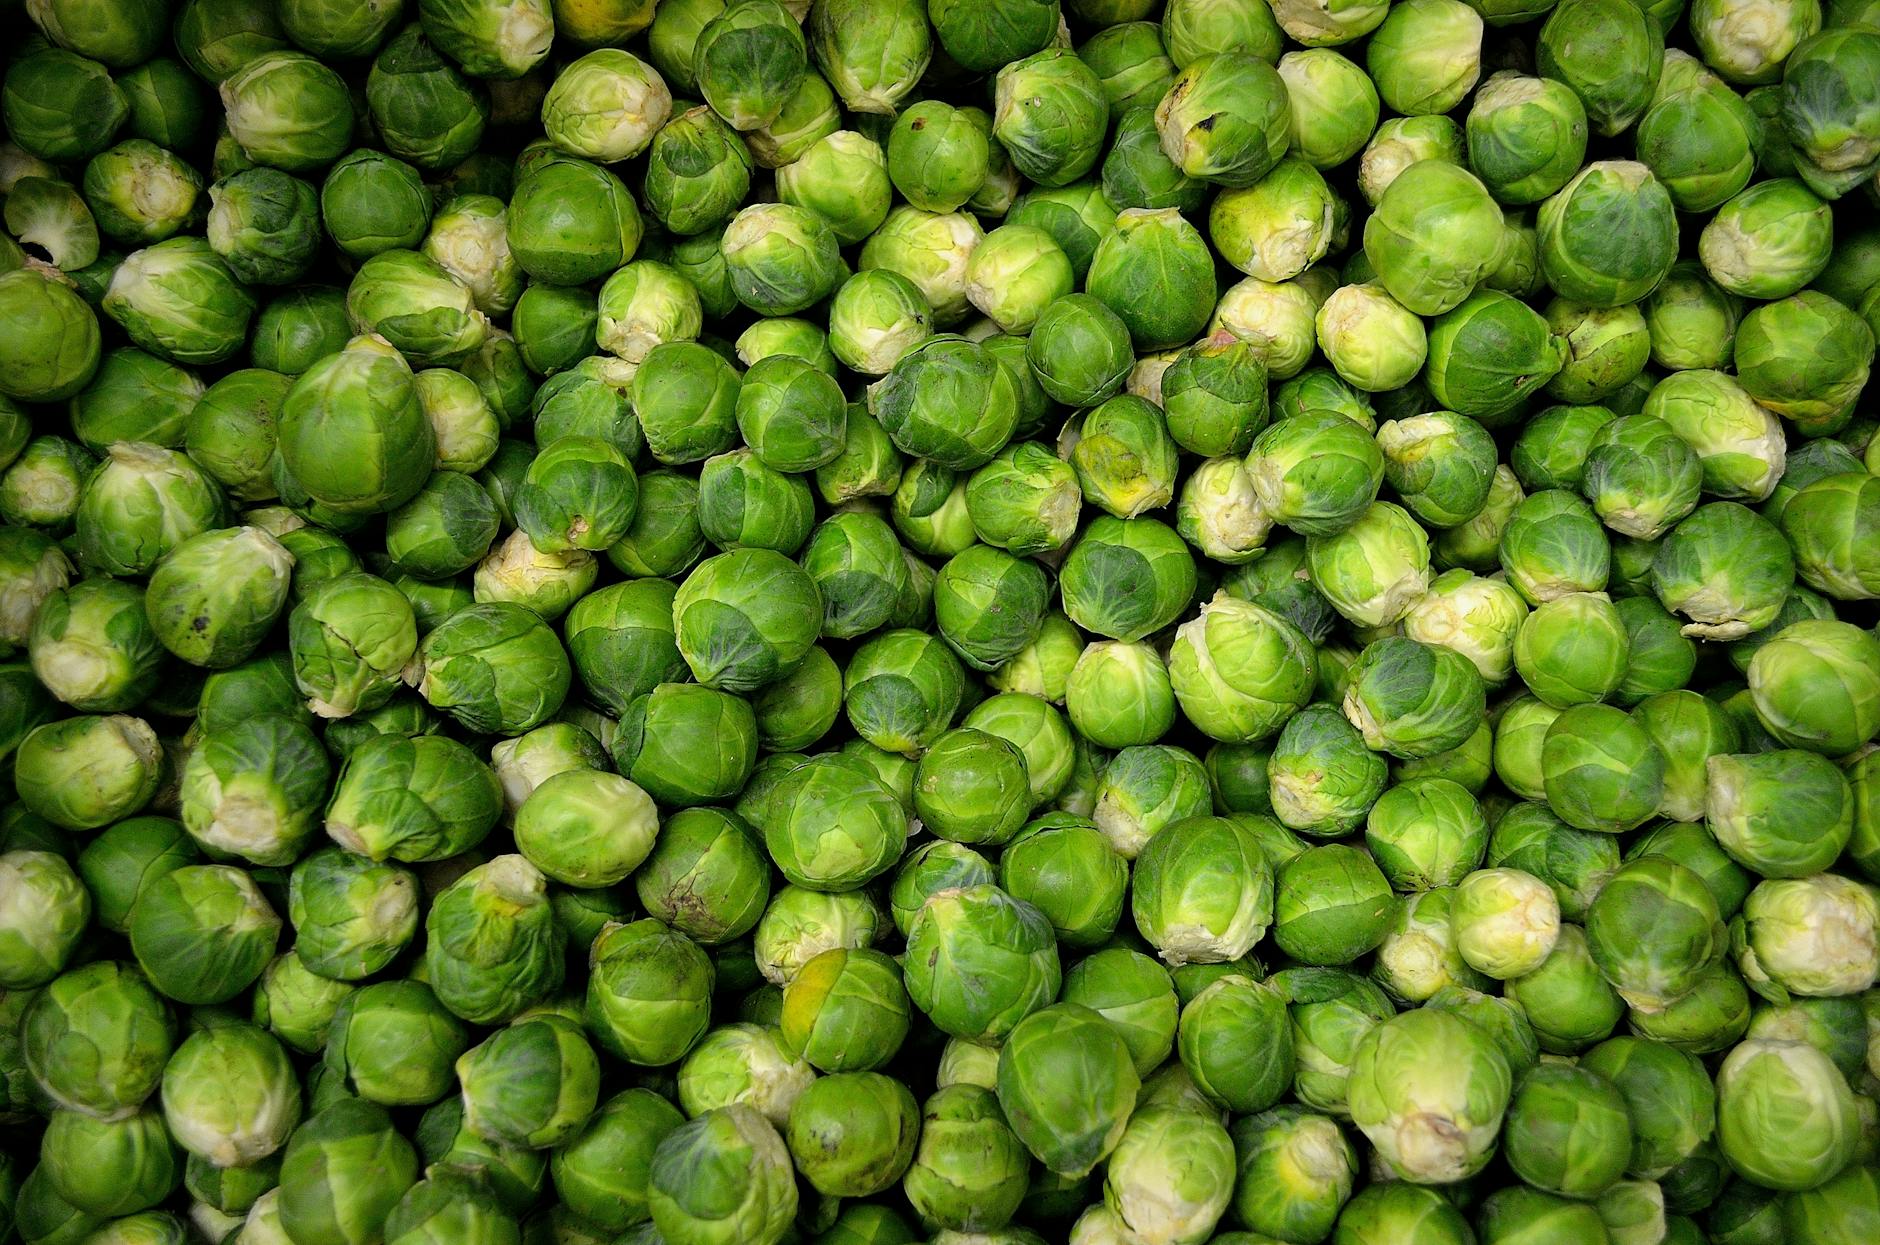 How To Grow Brussel Sprouts | Grow A Vegetable Garden With In Season Vegetables